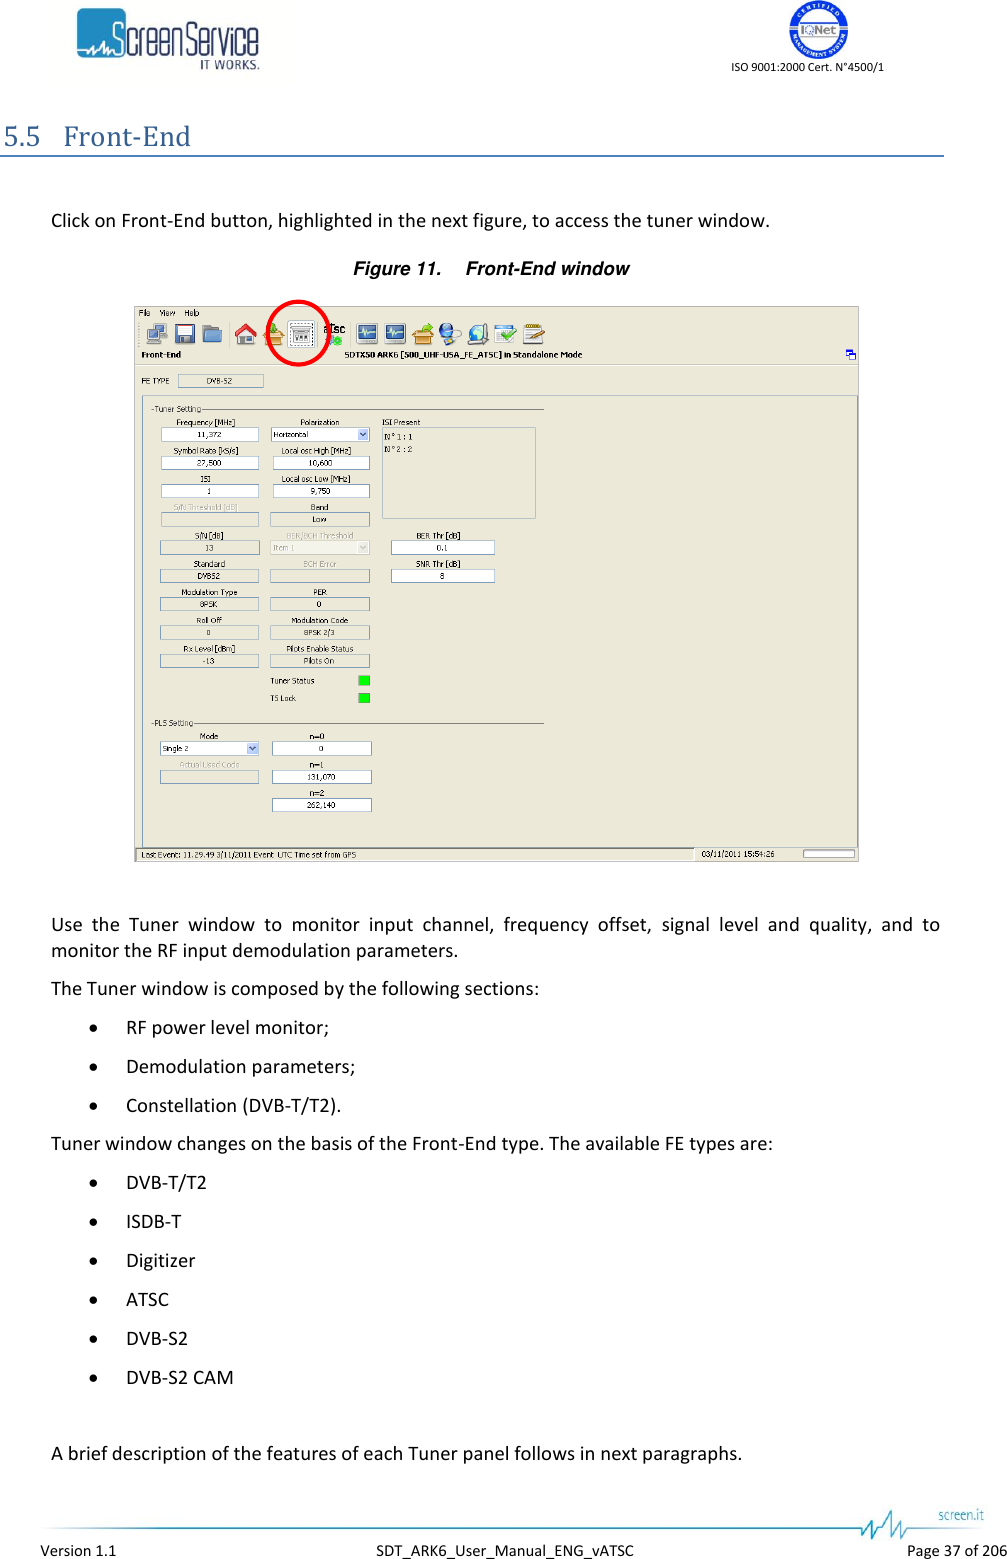    ISO 9001:2000 Cert. N°4500/1   Version 1.1  SDT_ARK6_User_Manual_ENG_vATSC  Page 37 of 206 5.5 Front-End  Click on Front-End button, highlighted in the next figure, to access the tuner window. Figure 11. Front-End window   Use  the  Tuner  window  to  monitor  input  channel,  frequency  offset,  signal  level  and  quality,  and  to monitor the RF input demodulation parameters. The Tuner window is composed by the following sections:  RF power level monitor;  Demodulation parameters;  Constellation (DVB-T/T2). Tuner window changes on the basis of the Front-End type. The available FE types are:  DVB-T/T2  ISDB-T  Digitizer  ATSC  DVB-S2  DVB-S2 CAM  A brief description of the features of each Tuner panel follows in next paragraphs. 